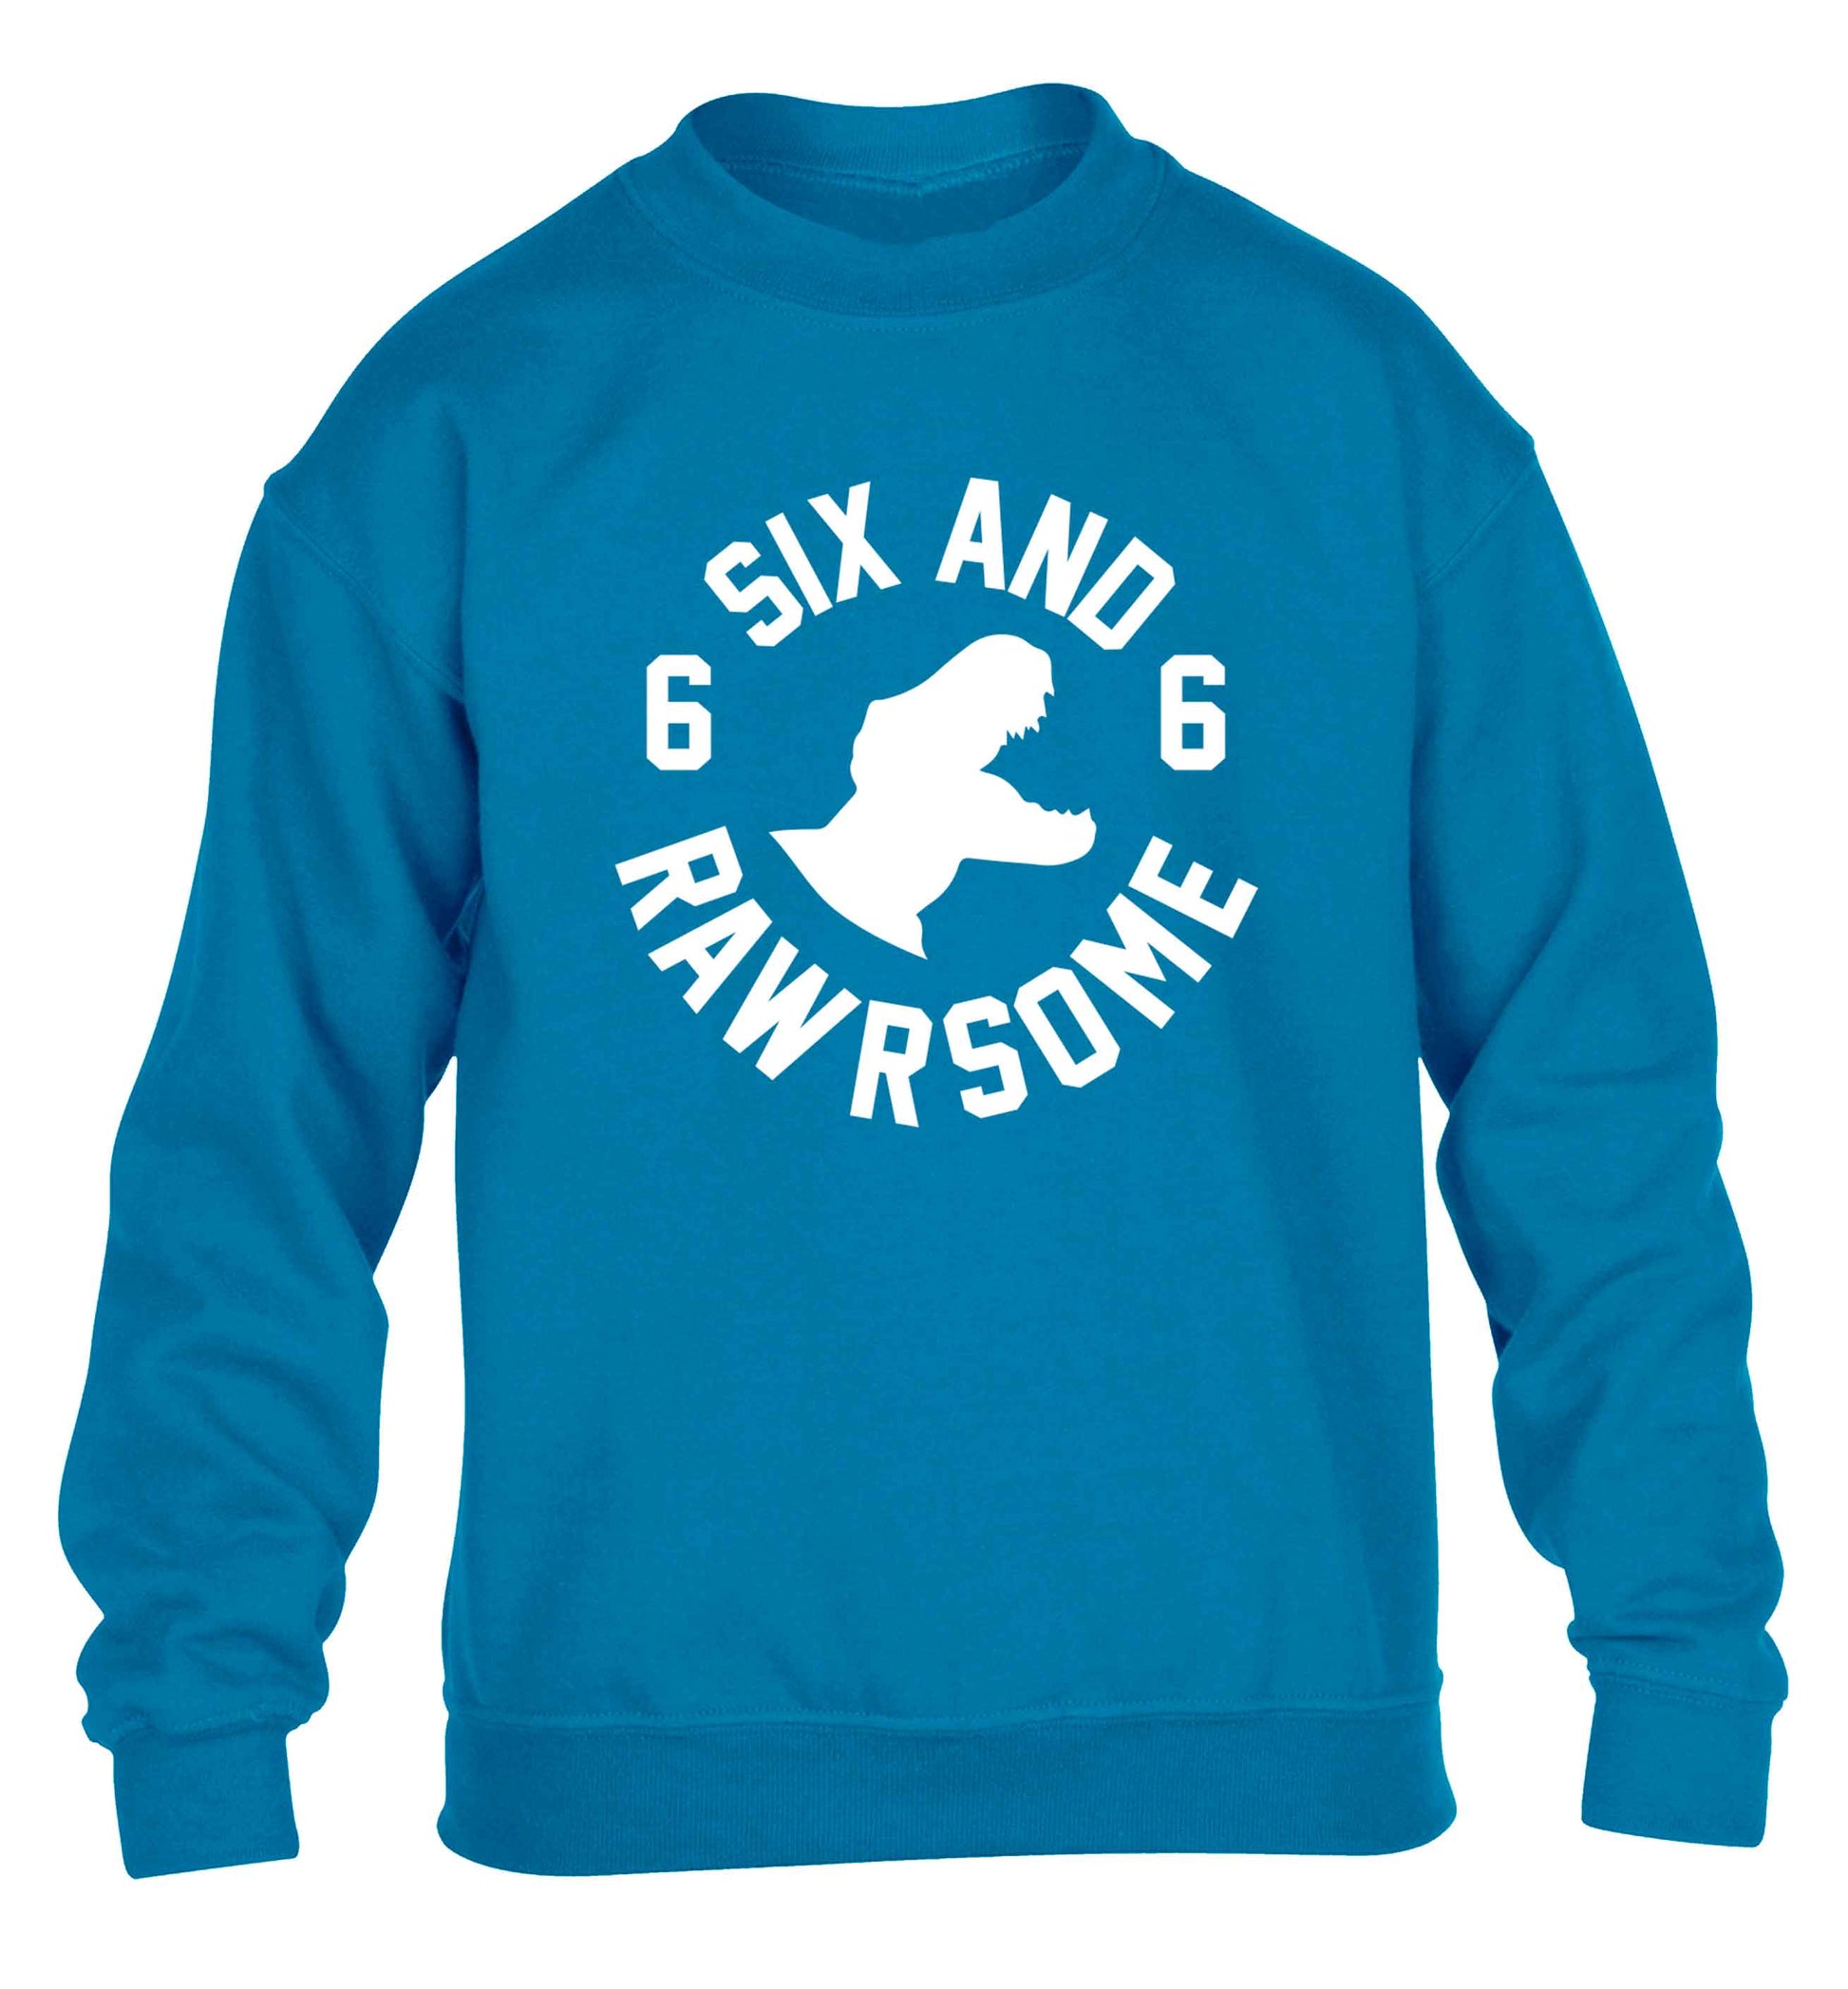 Six and rawrsome children's blue sweater 12-13 Years